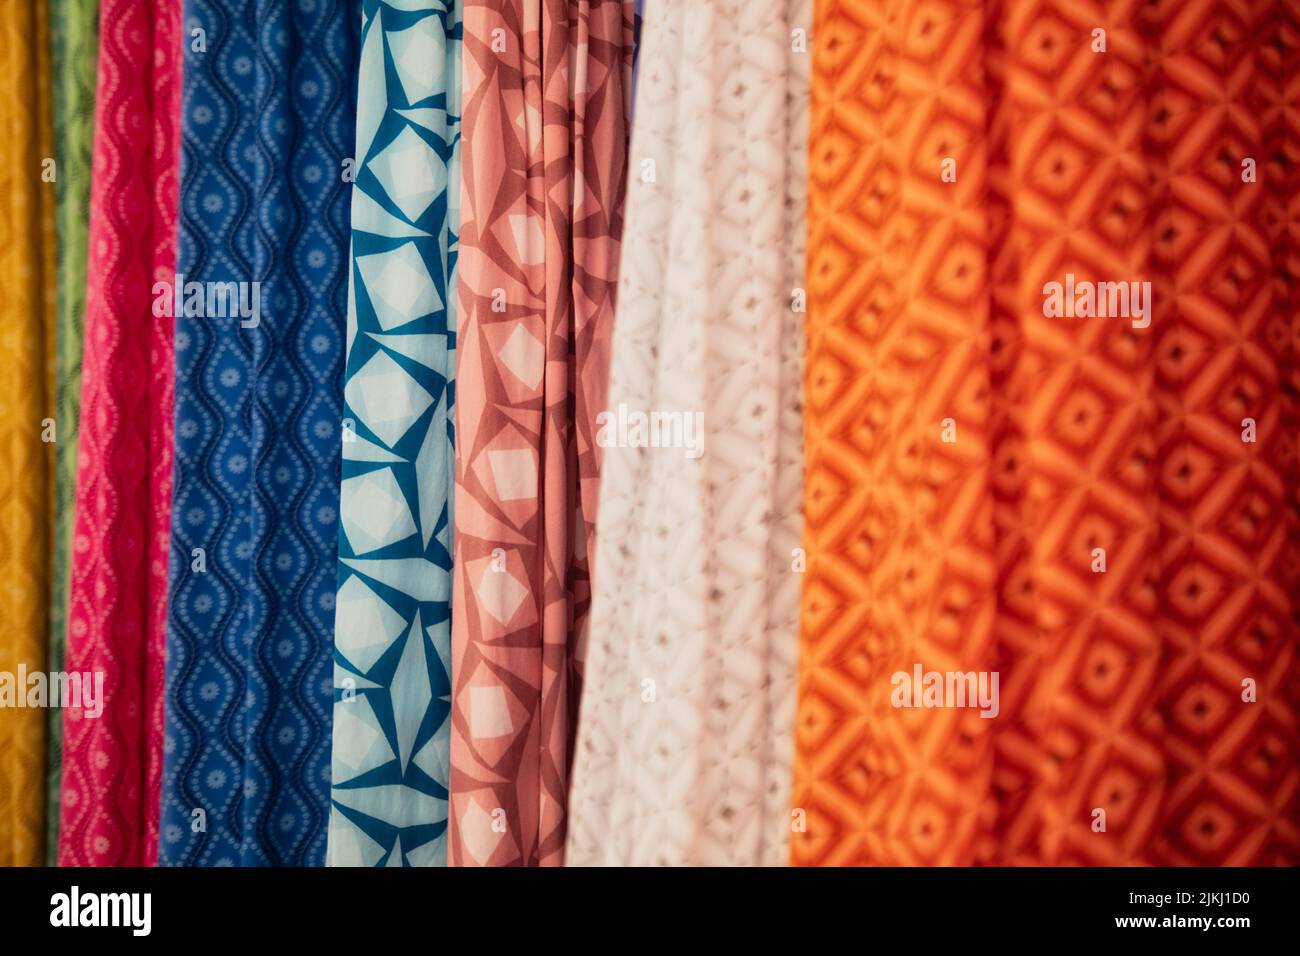 Spain, Balearic islands, Mallorca, district of Manacor, Calas de Mallorca. Colorful beach clothes for sale in the shops in the city center, close up view of the fabric Stock Photo